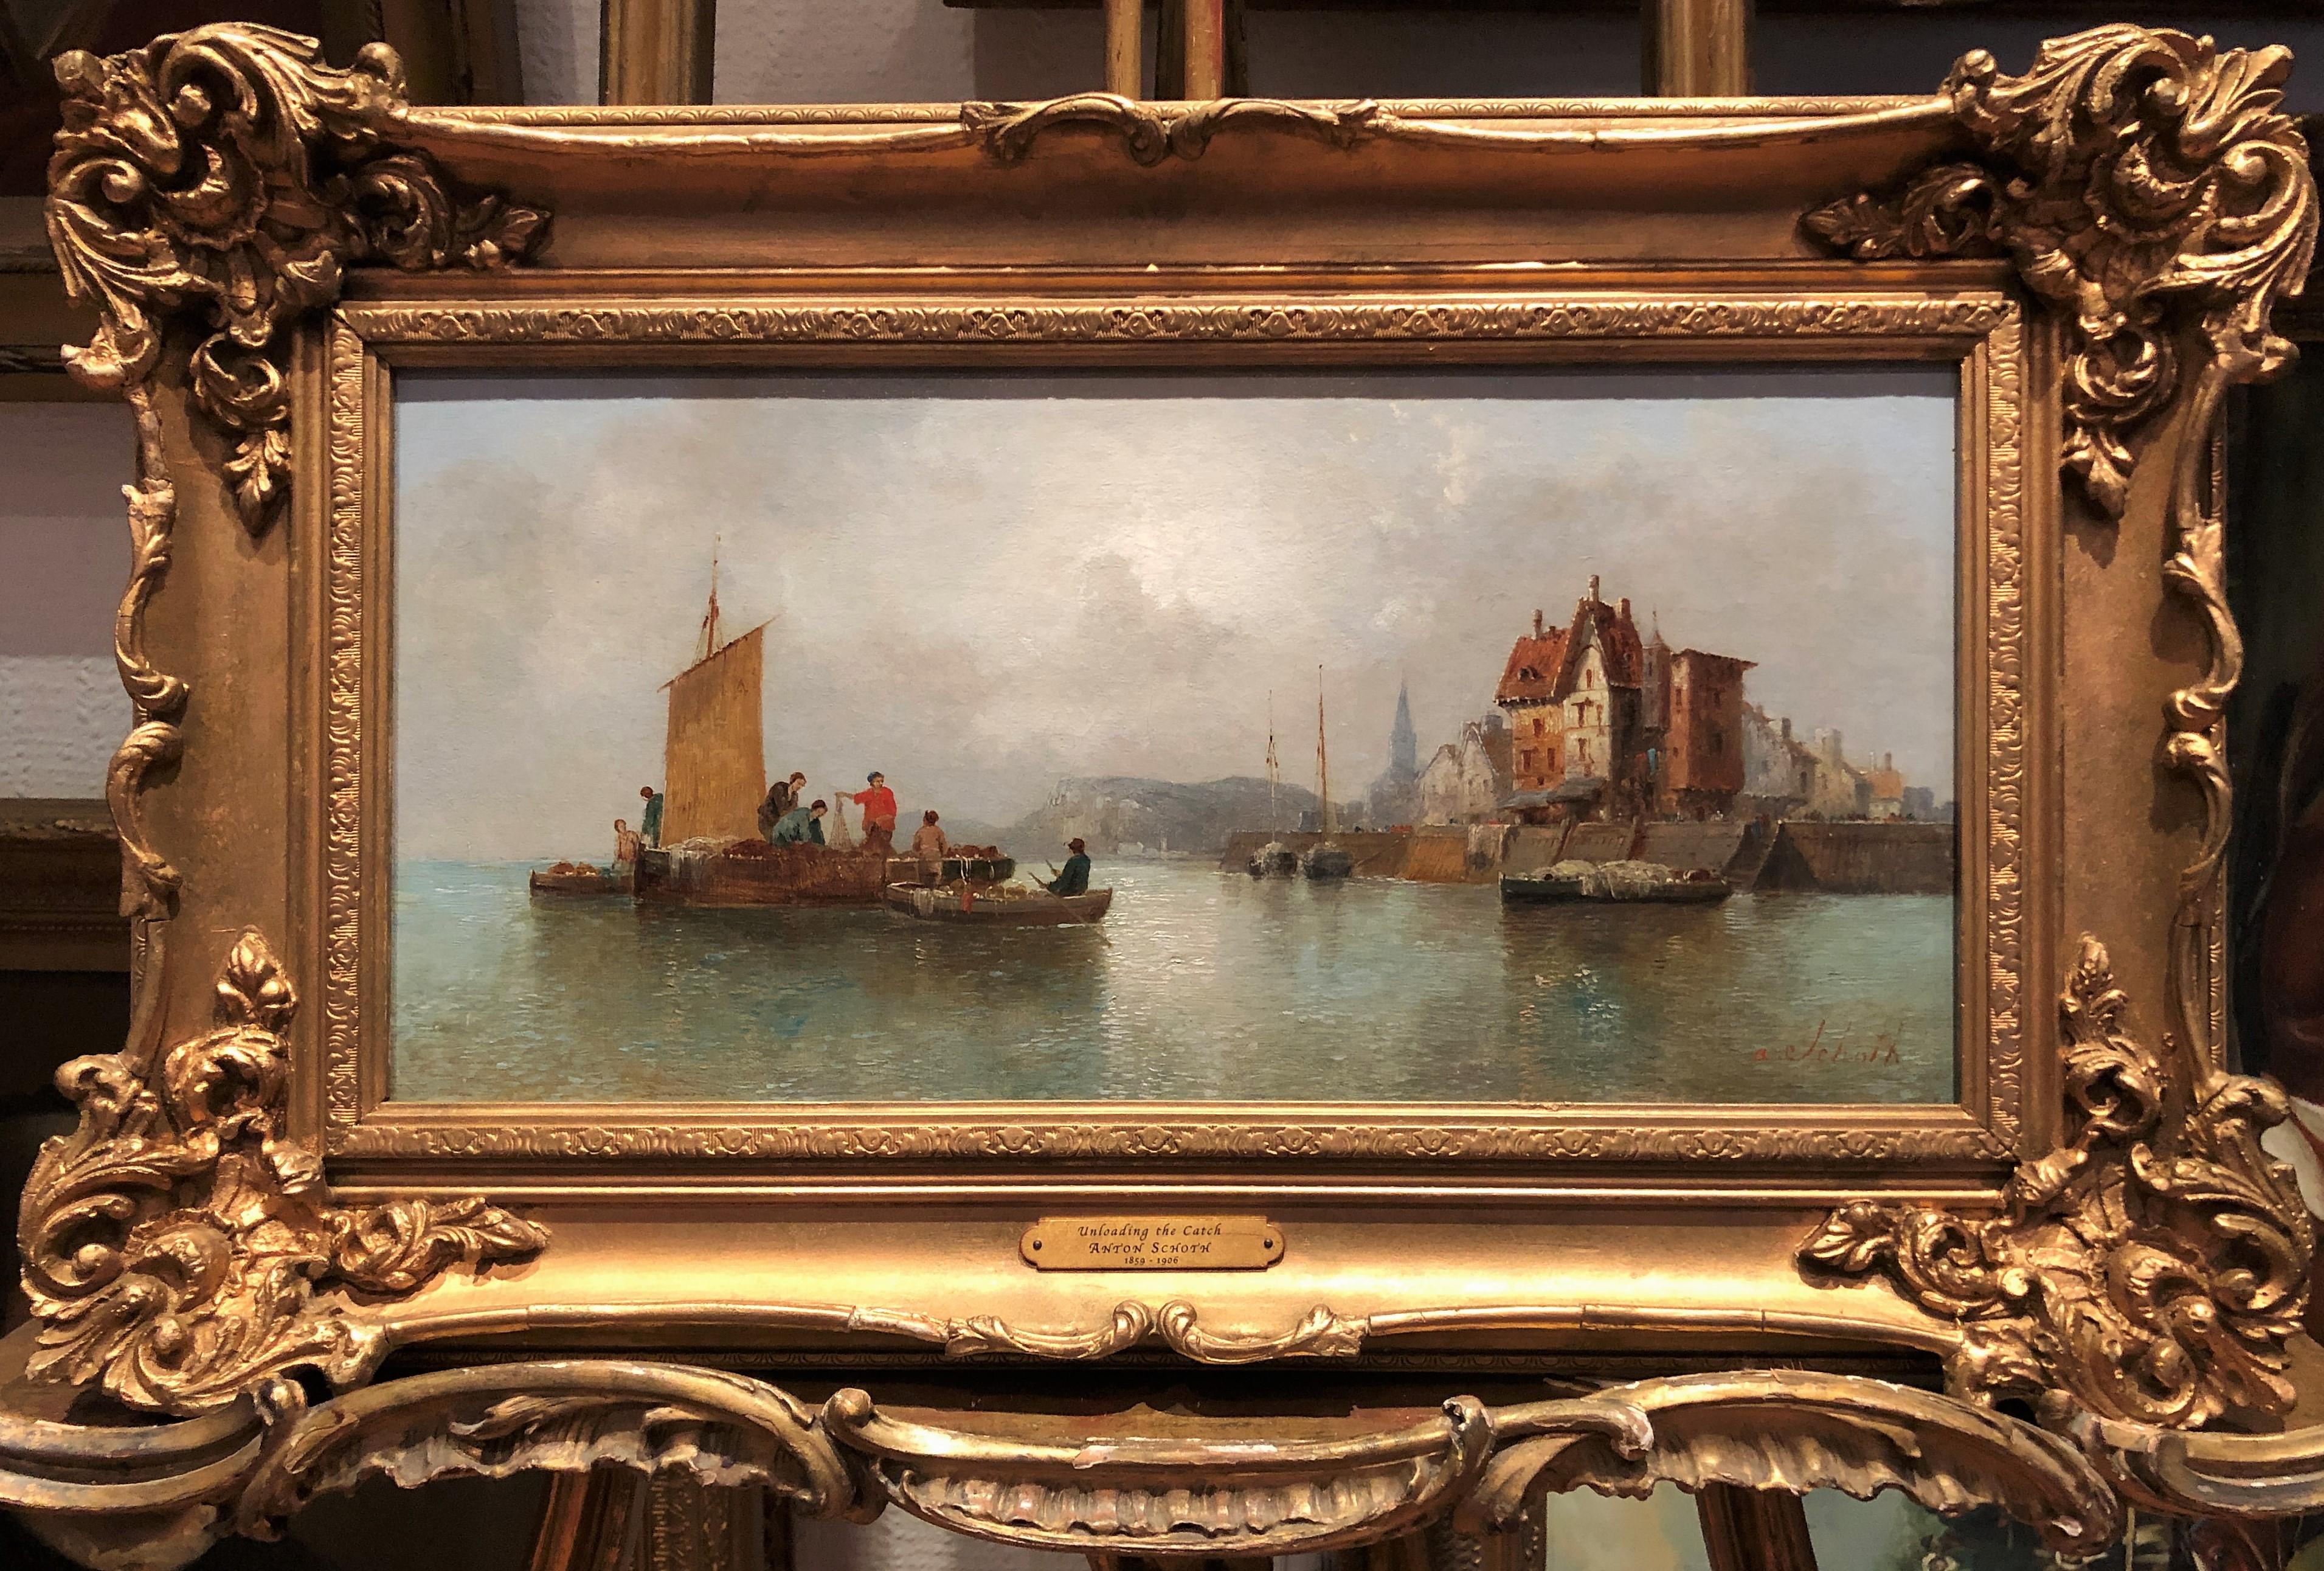 OIL PAINTING SIGNED OLD FINE MASTER PAINTER 19th Century Austria SCHOOL

Fine Original Antique 19th Century British OLD MASTER

OIL PAINTING

GOLD GILT FRAME

New Collection

NEW COLLECTION Of RARE PIECES OF ENGLISH HISTORY

By Anton Schoth (1859 -